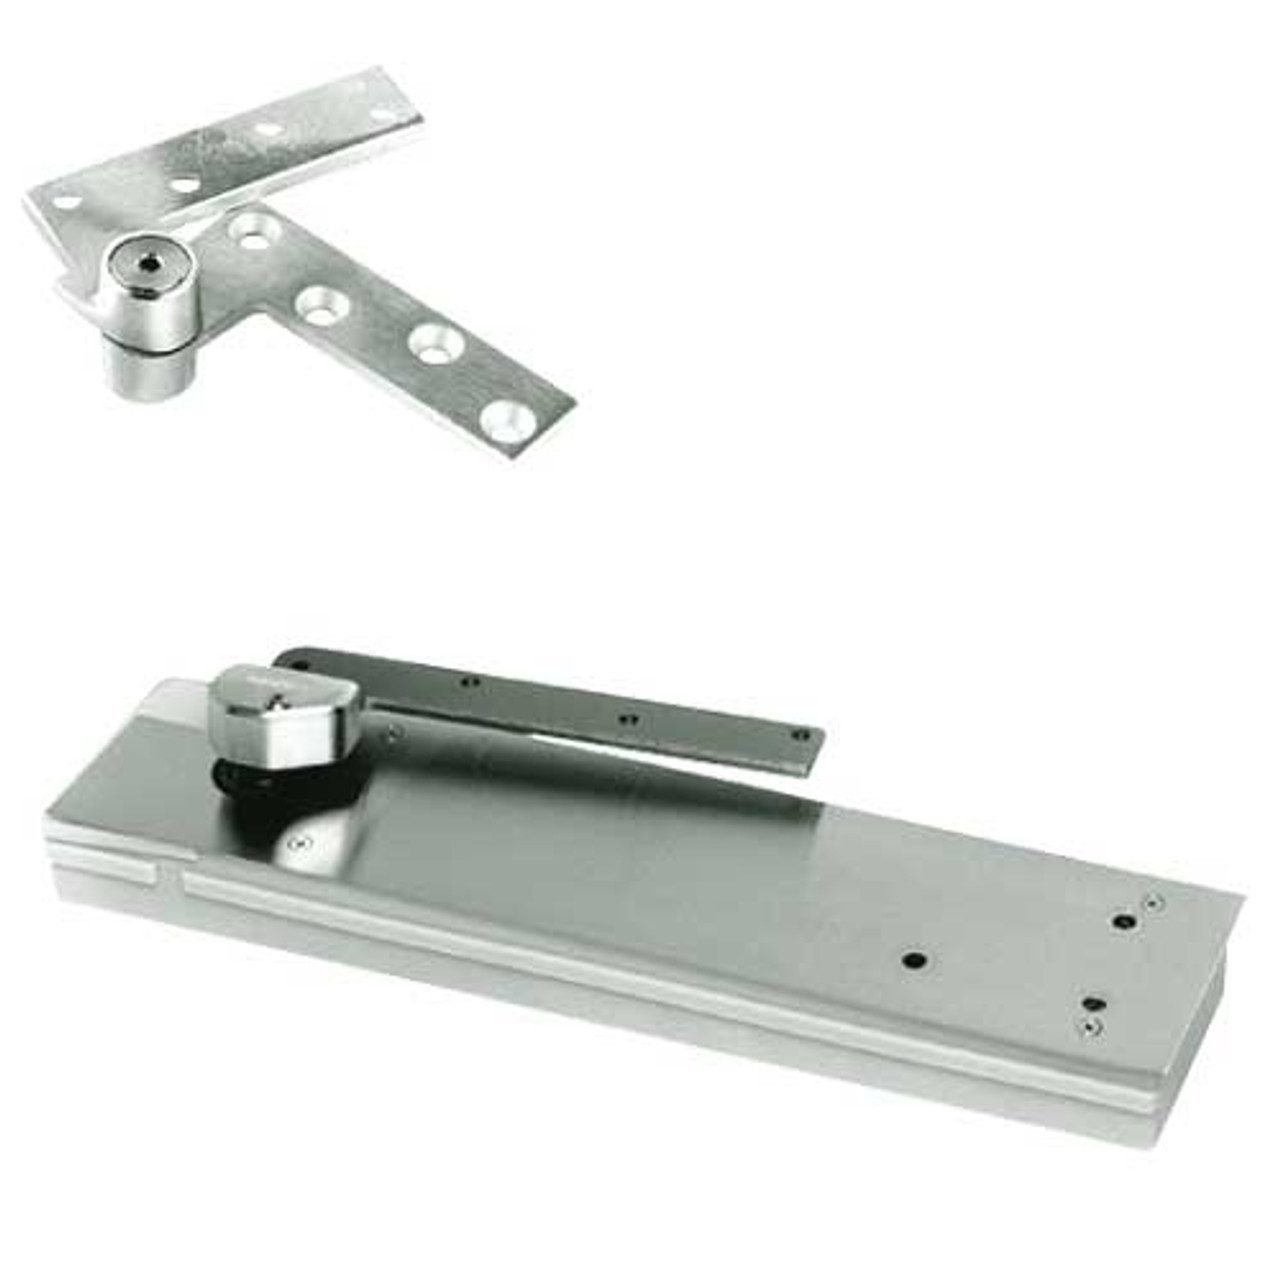 5103ABC105-1-1/2OS-LCC-LH-618 Rixson 51 Series 1-1/2" Offset Hung Shallow Depth Floor Closers in Bright Nickel Finish